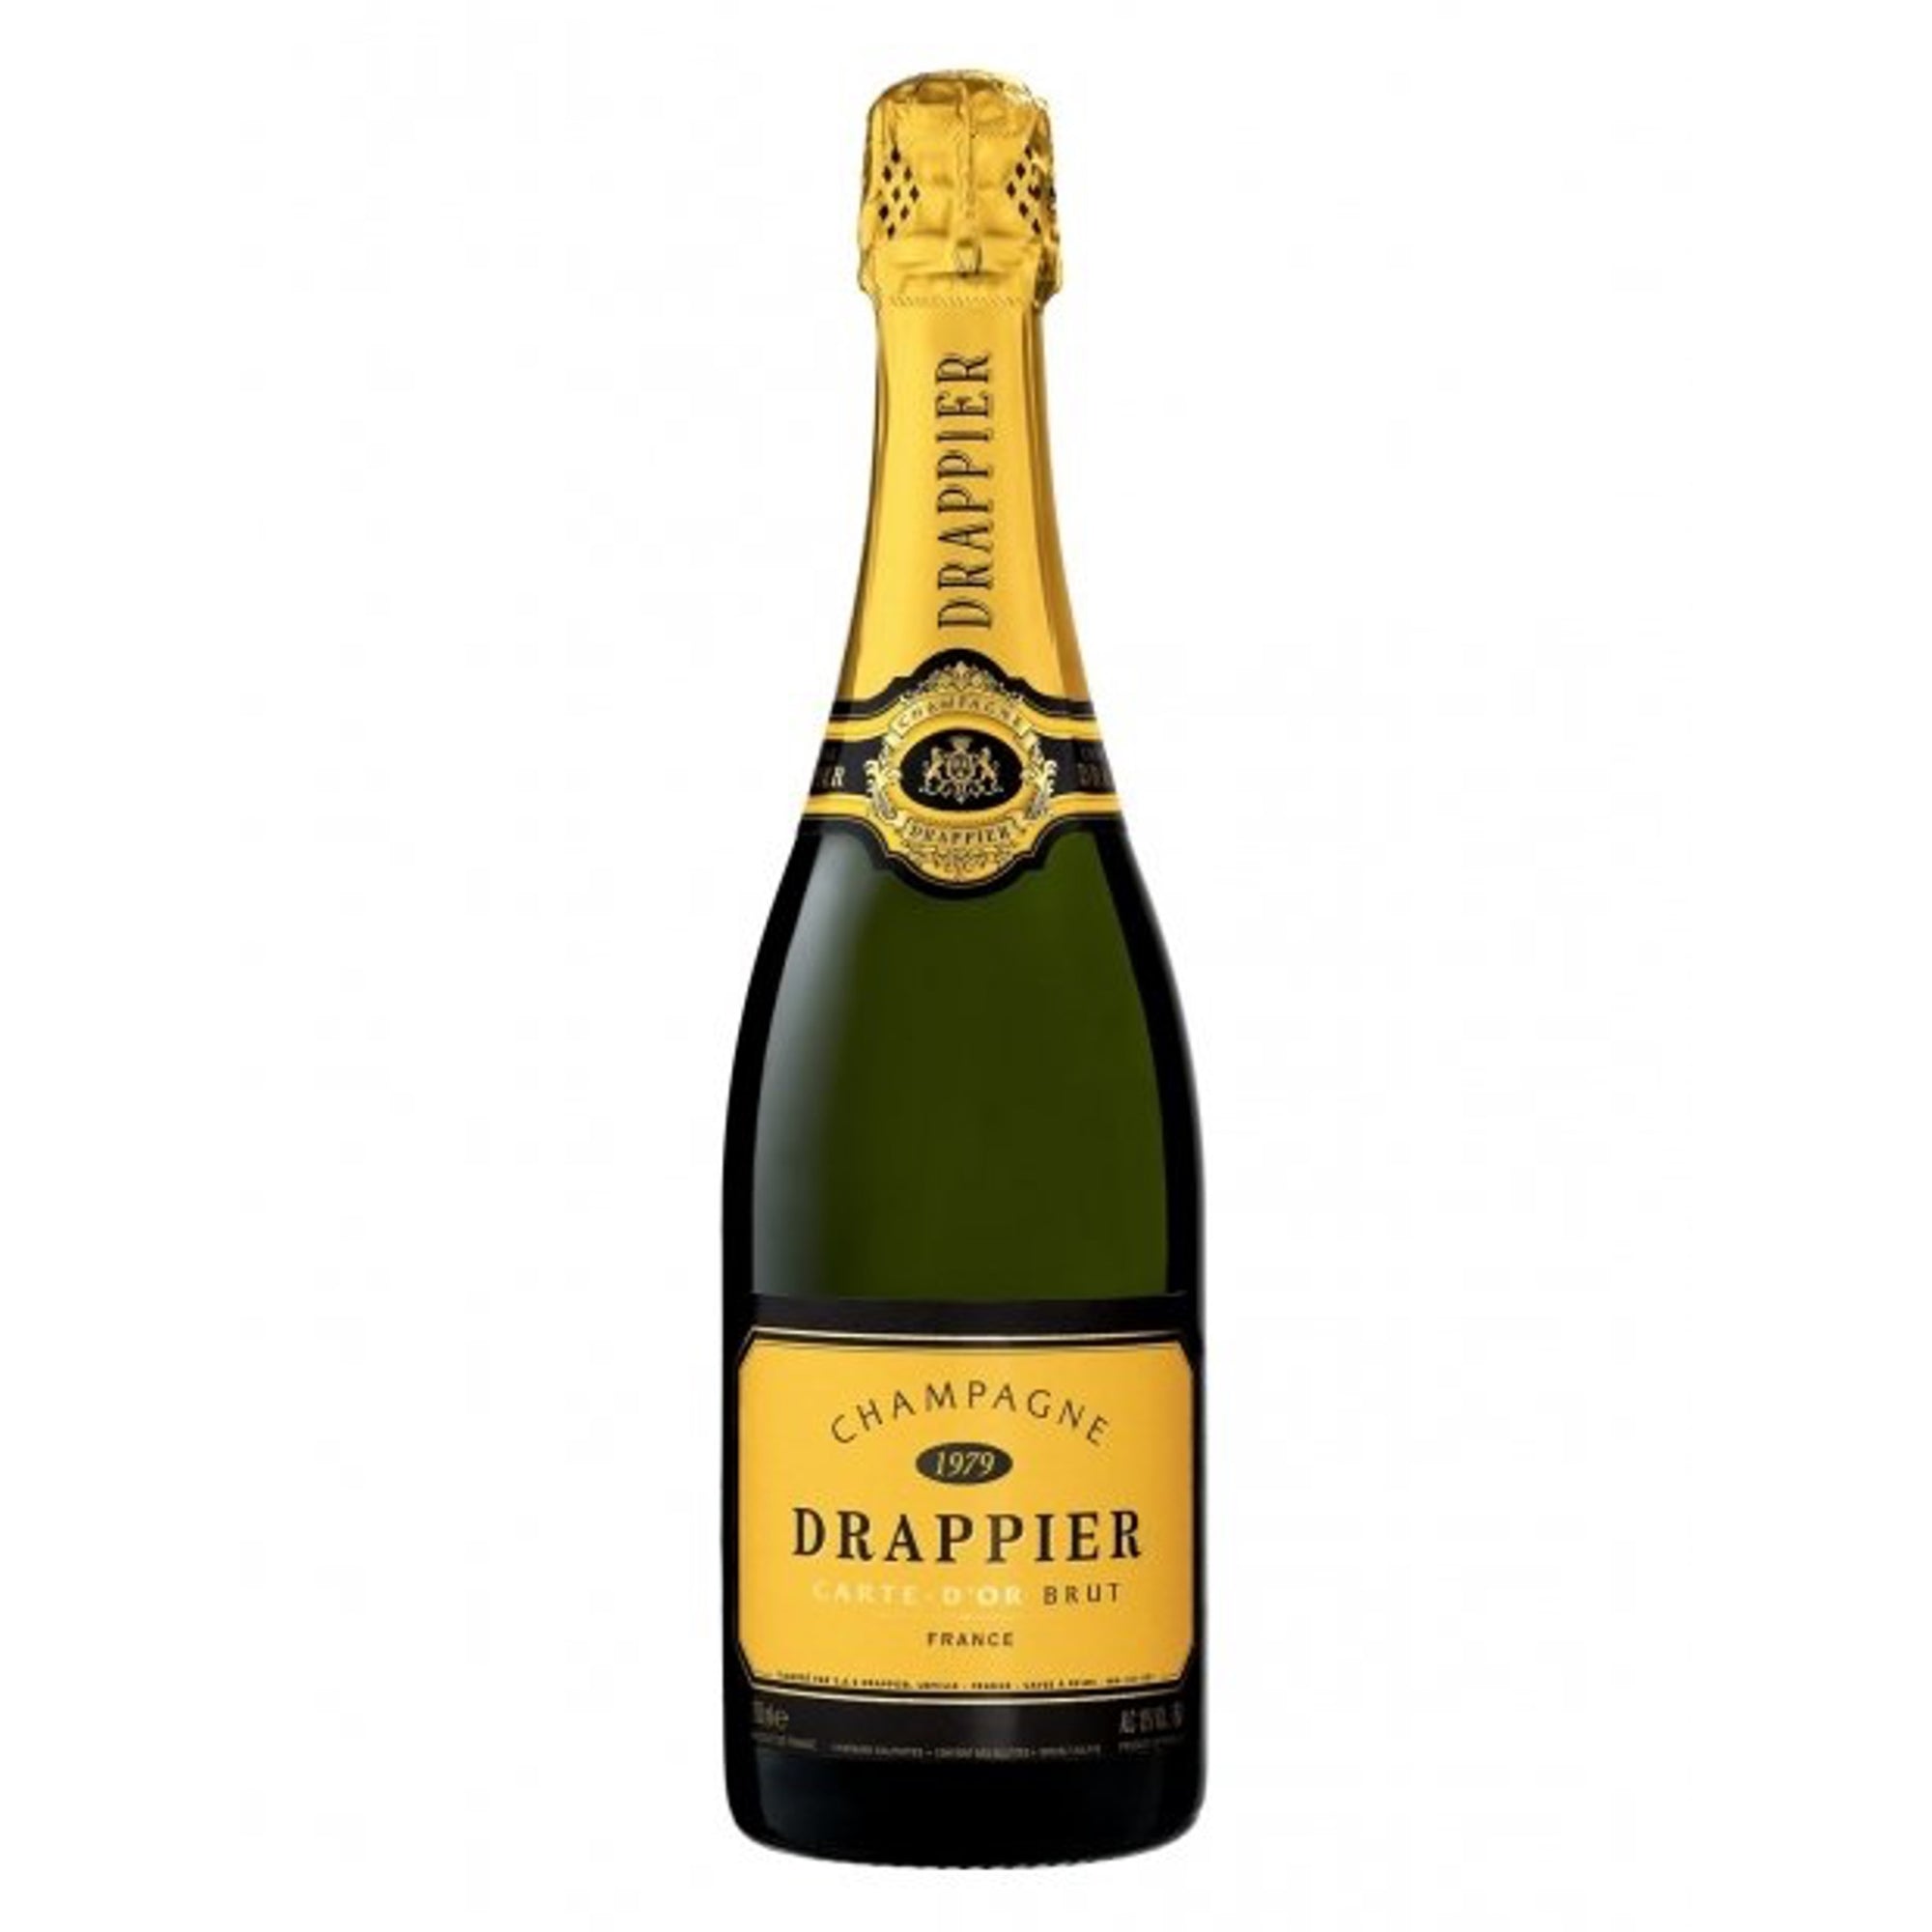 DRAPPIER Champagne Brut "Carte d'Or" 1959